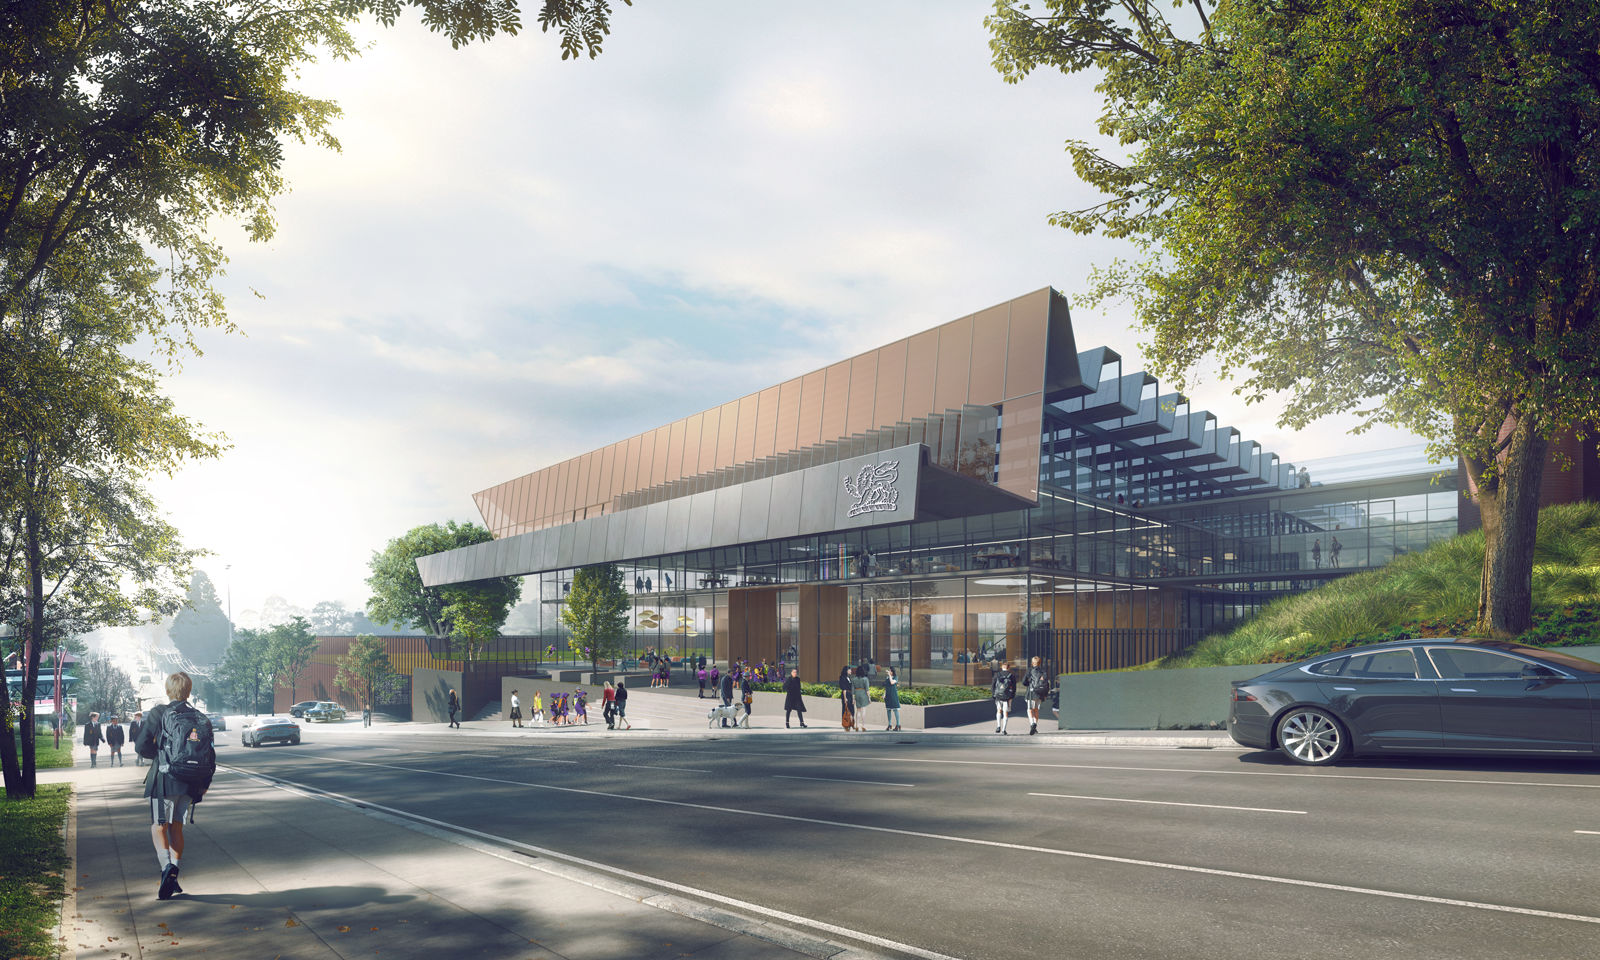 Artist’s impression of the proposed Signature Building at The Hutchins School, viewed from Nelson Road.